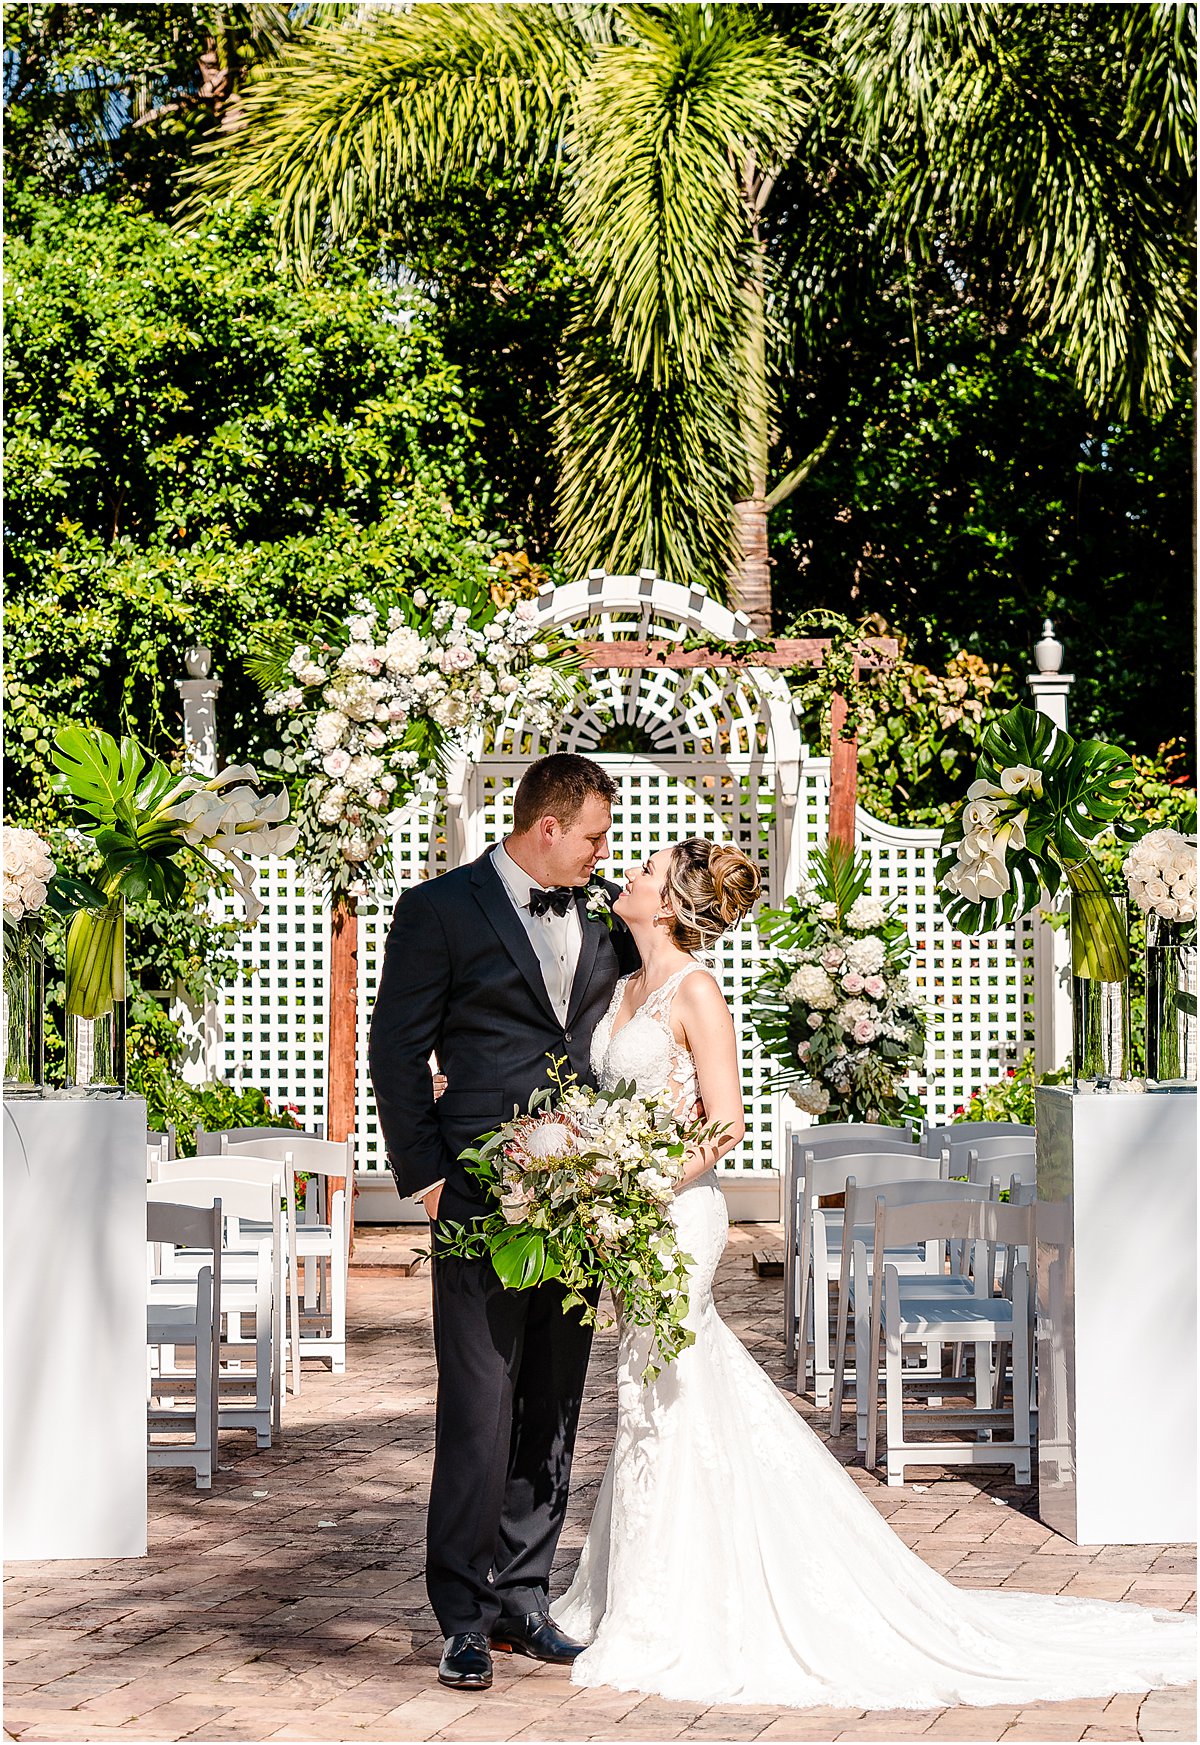 Perks of a Prenup for a Palm Beach Wedding | Palm Beach, FL | Married in Palm Beach | www.marriedinpalmbeach.com | Organic Moments Photography